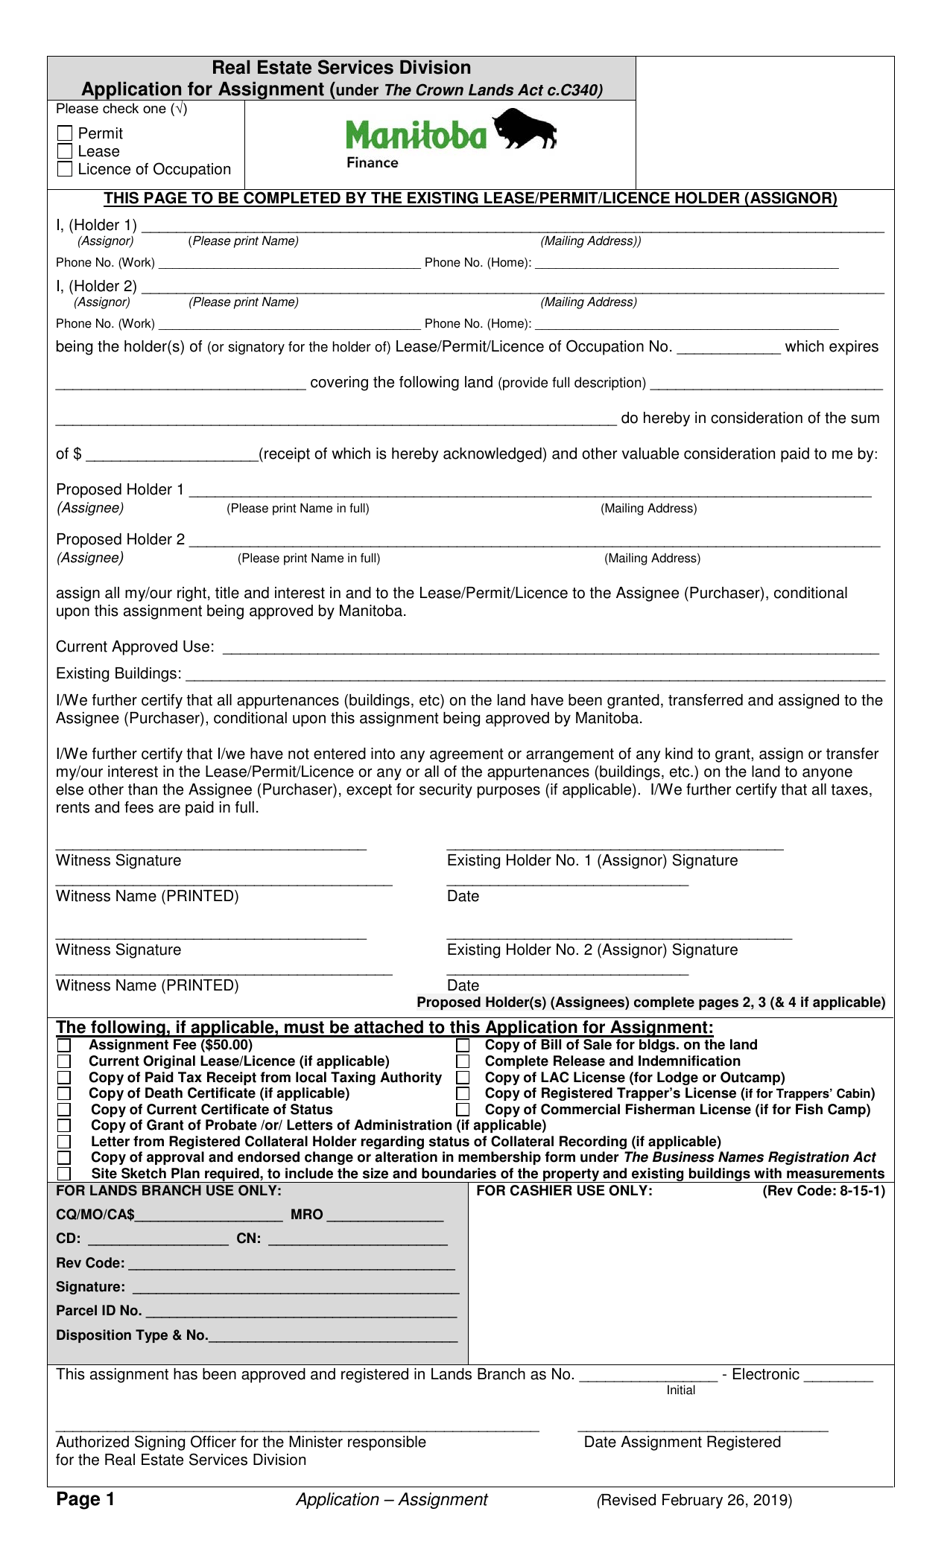 Application for Assignment - Manitoba, Canada, Page 1